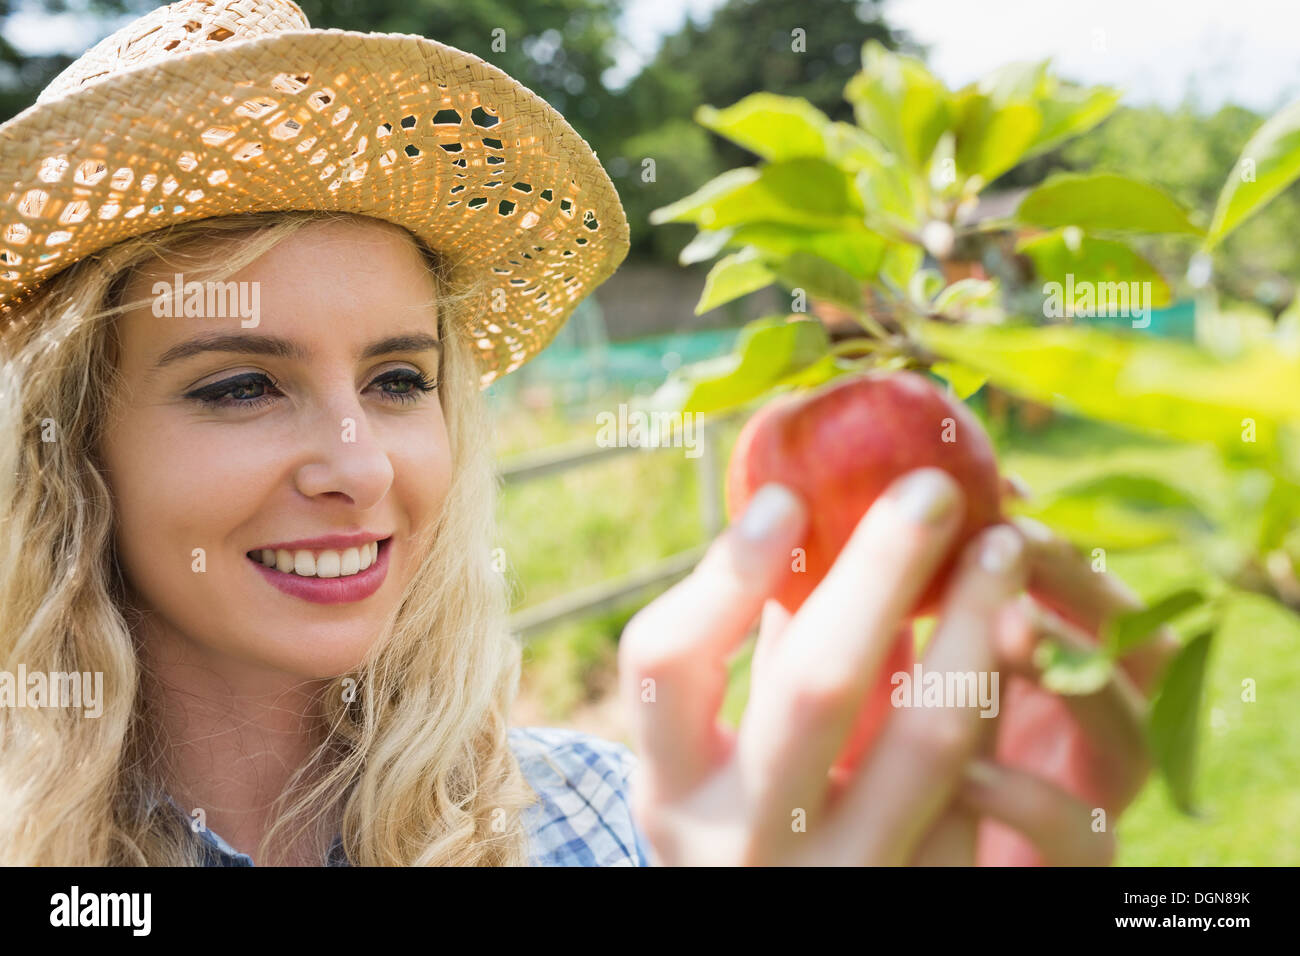 Young blonde picking an apple from a tree Stock Photo